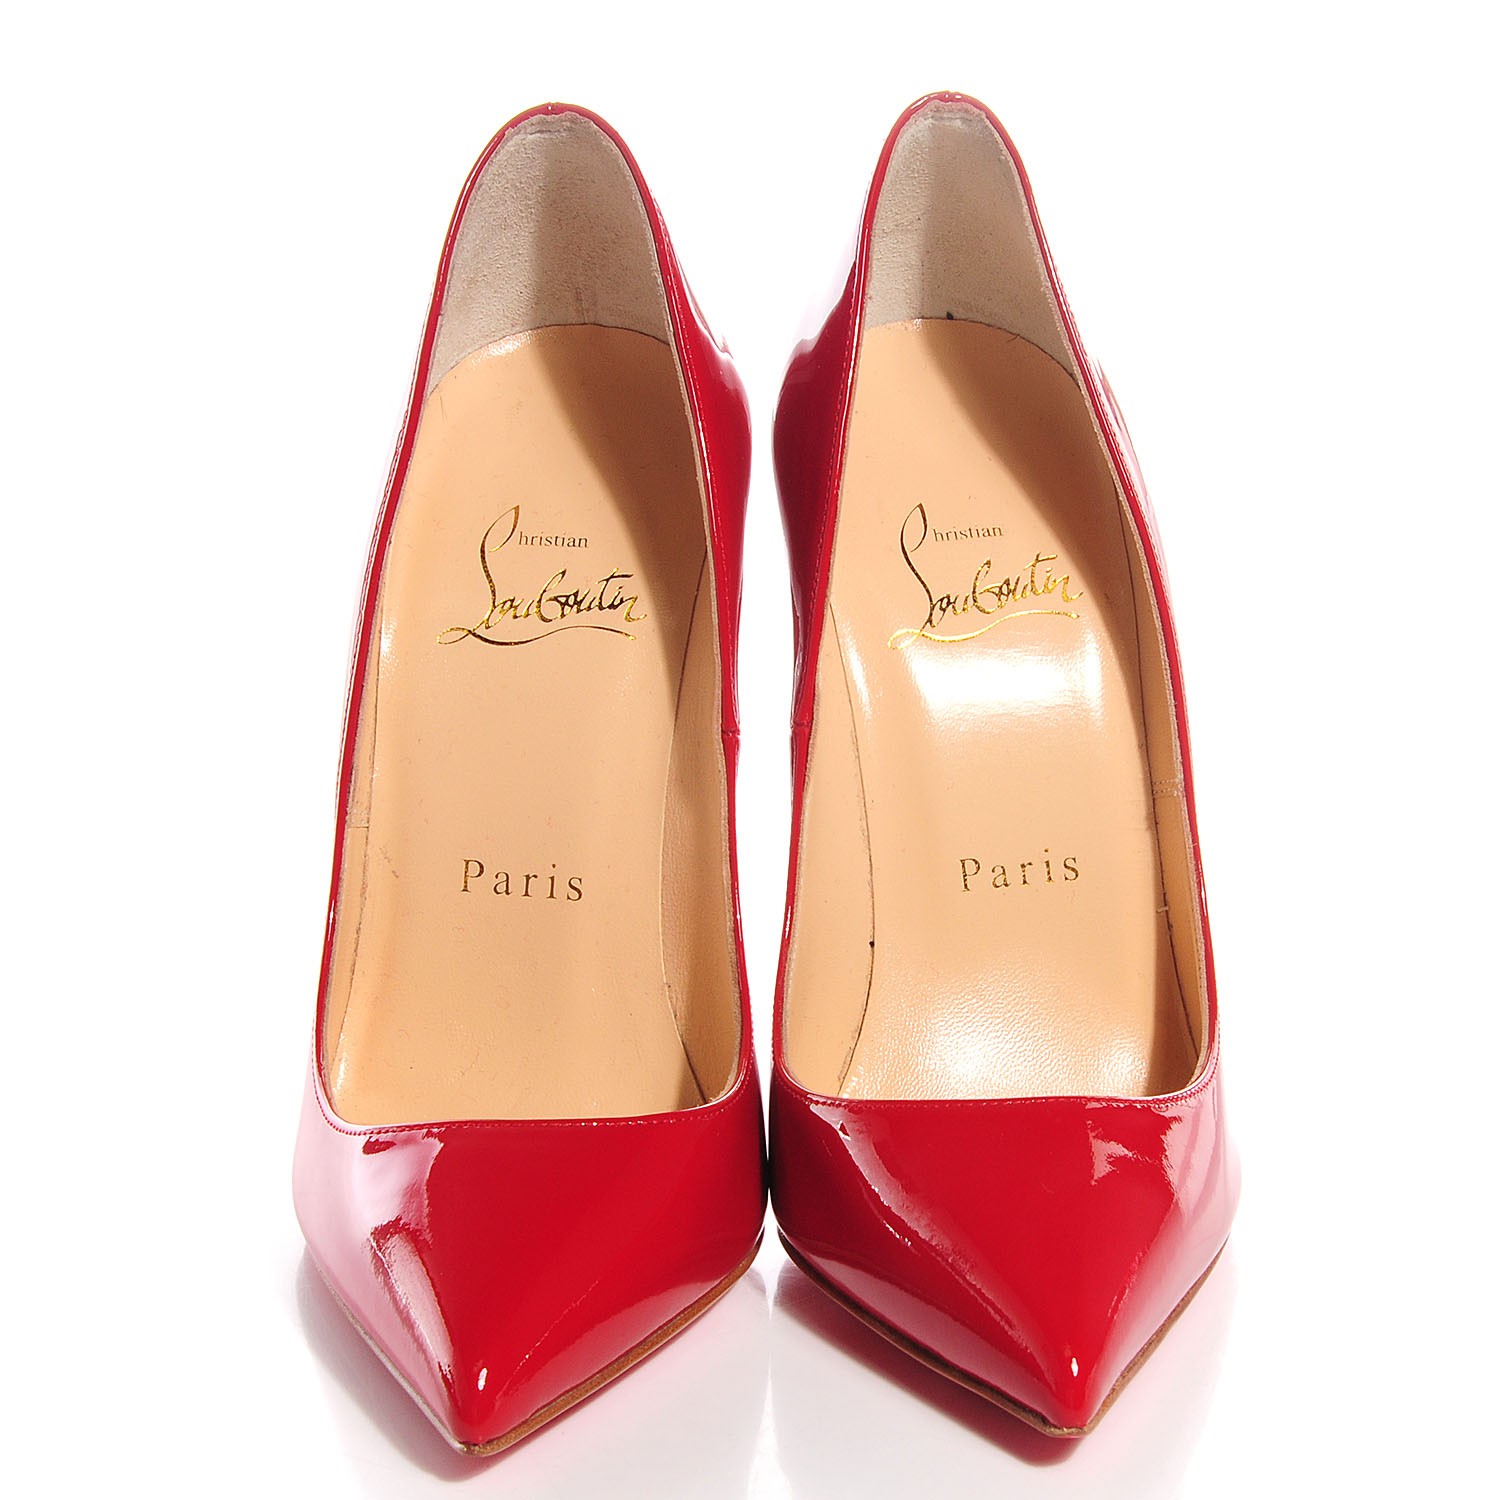 CHRISTIAN LOUBOUTIN Patent So Kate 120 Pumps 35 Red 99558